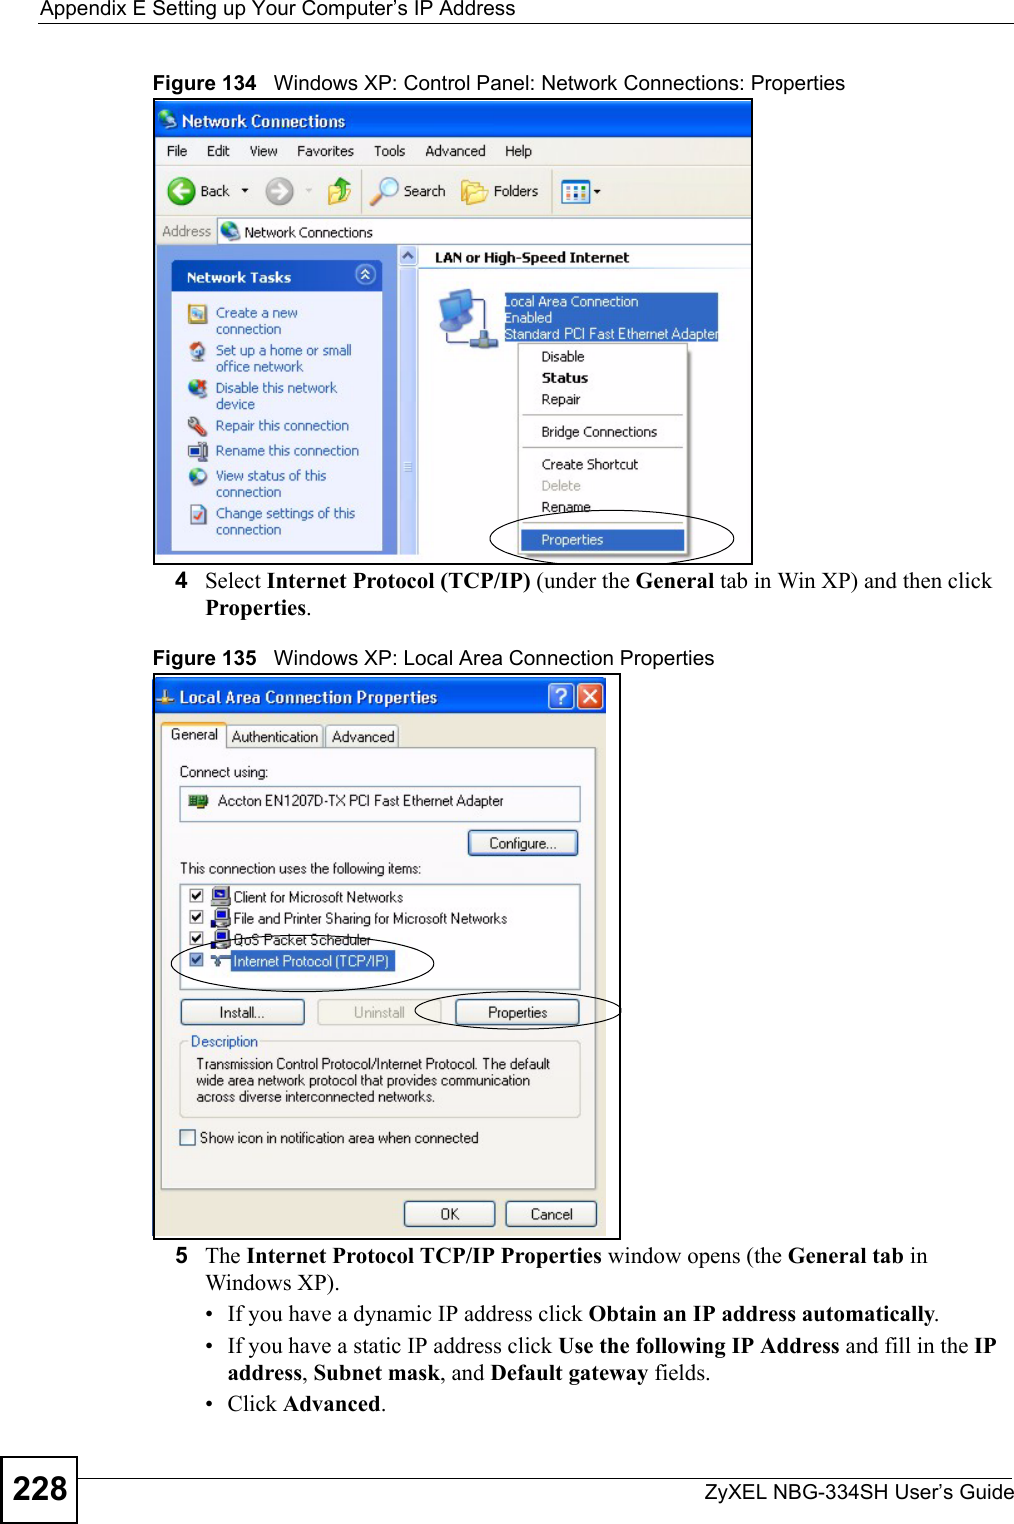 Appendix E Setting up Your Computer’s IP AddressZyXEL NBG-334SH User’s Guide228Figure 134   Windows XP: Control Panel: Network Connections: Properties4Select Internet Protocol (TCP/IP) (under the General tab in Win XP) and then click Properties.Figure 135   Windows XP: Local Area Connection Properties5The Internet Protocol TCP/IP Properties window opens (the General tab in Windows XP).• If you have a dynamic IP address click Obtain an IP address automatically.• If you have a static IP address click Use the following IP Address and fill in the IP address, Subnet mask, and Default gateway fields. • Click Advanced.